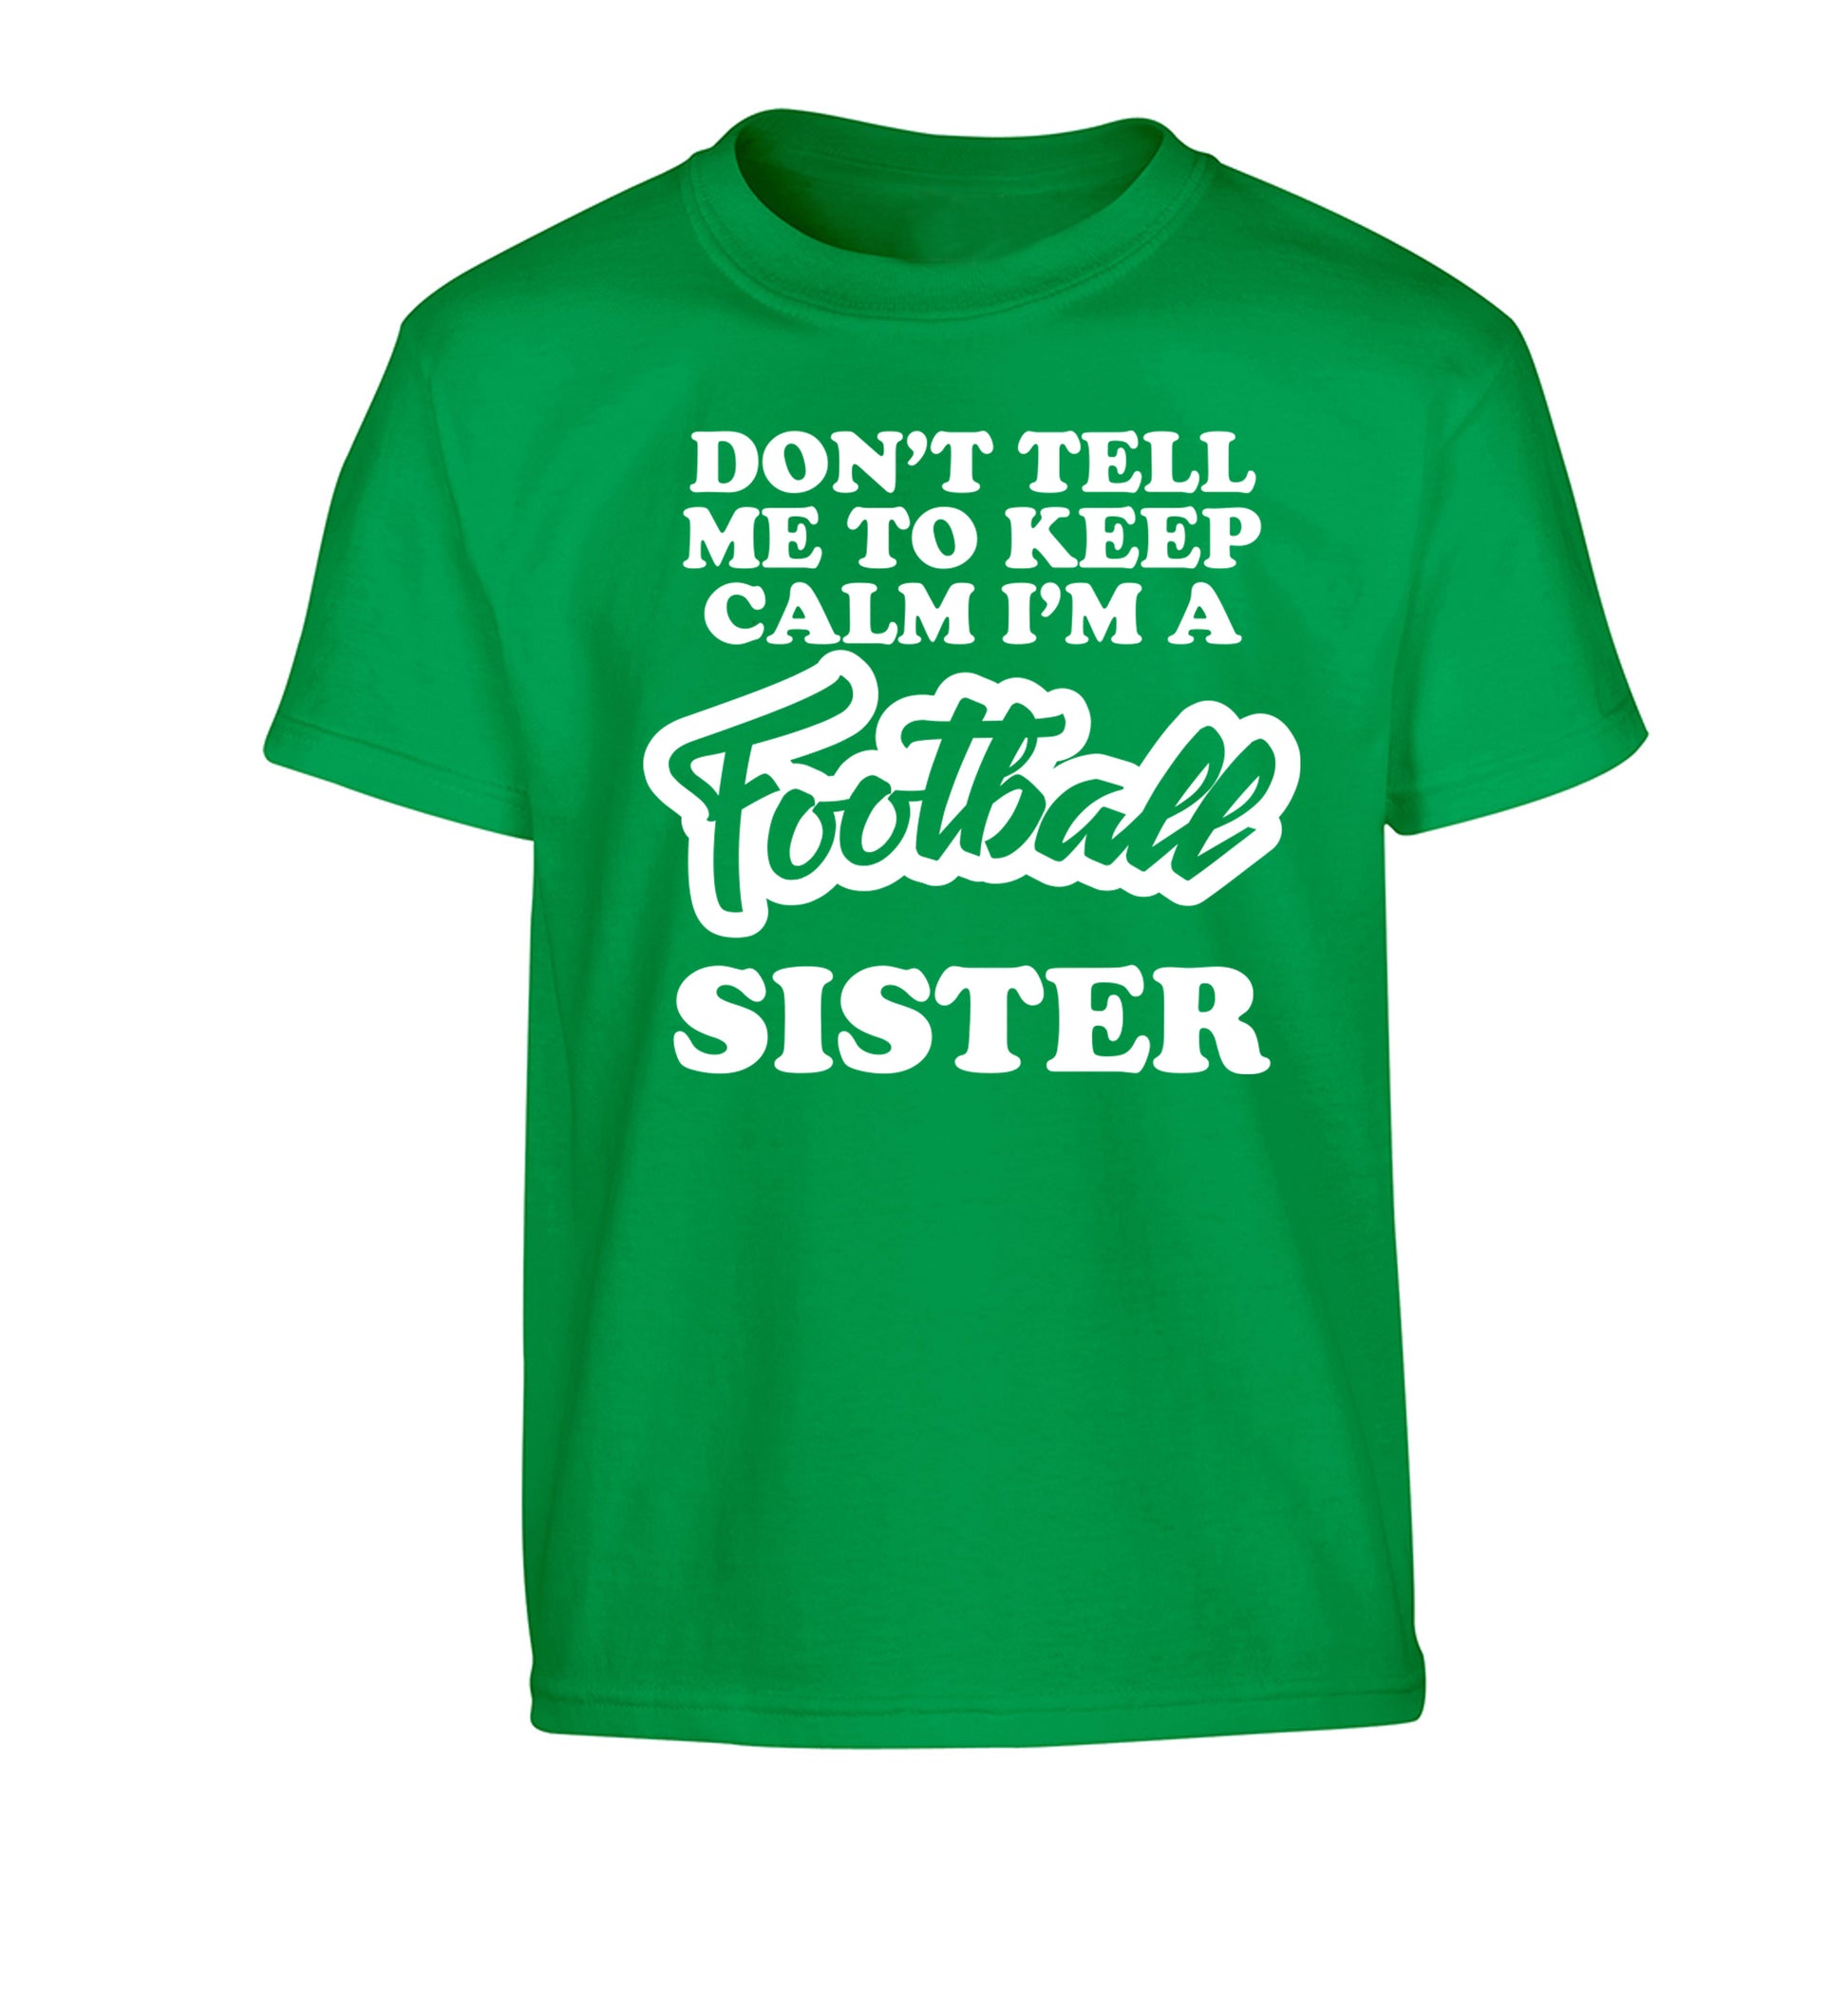 Don't tell me to keep calm I'm a football sister Children's green Tshirt 12-14 Years